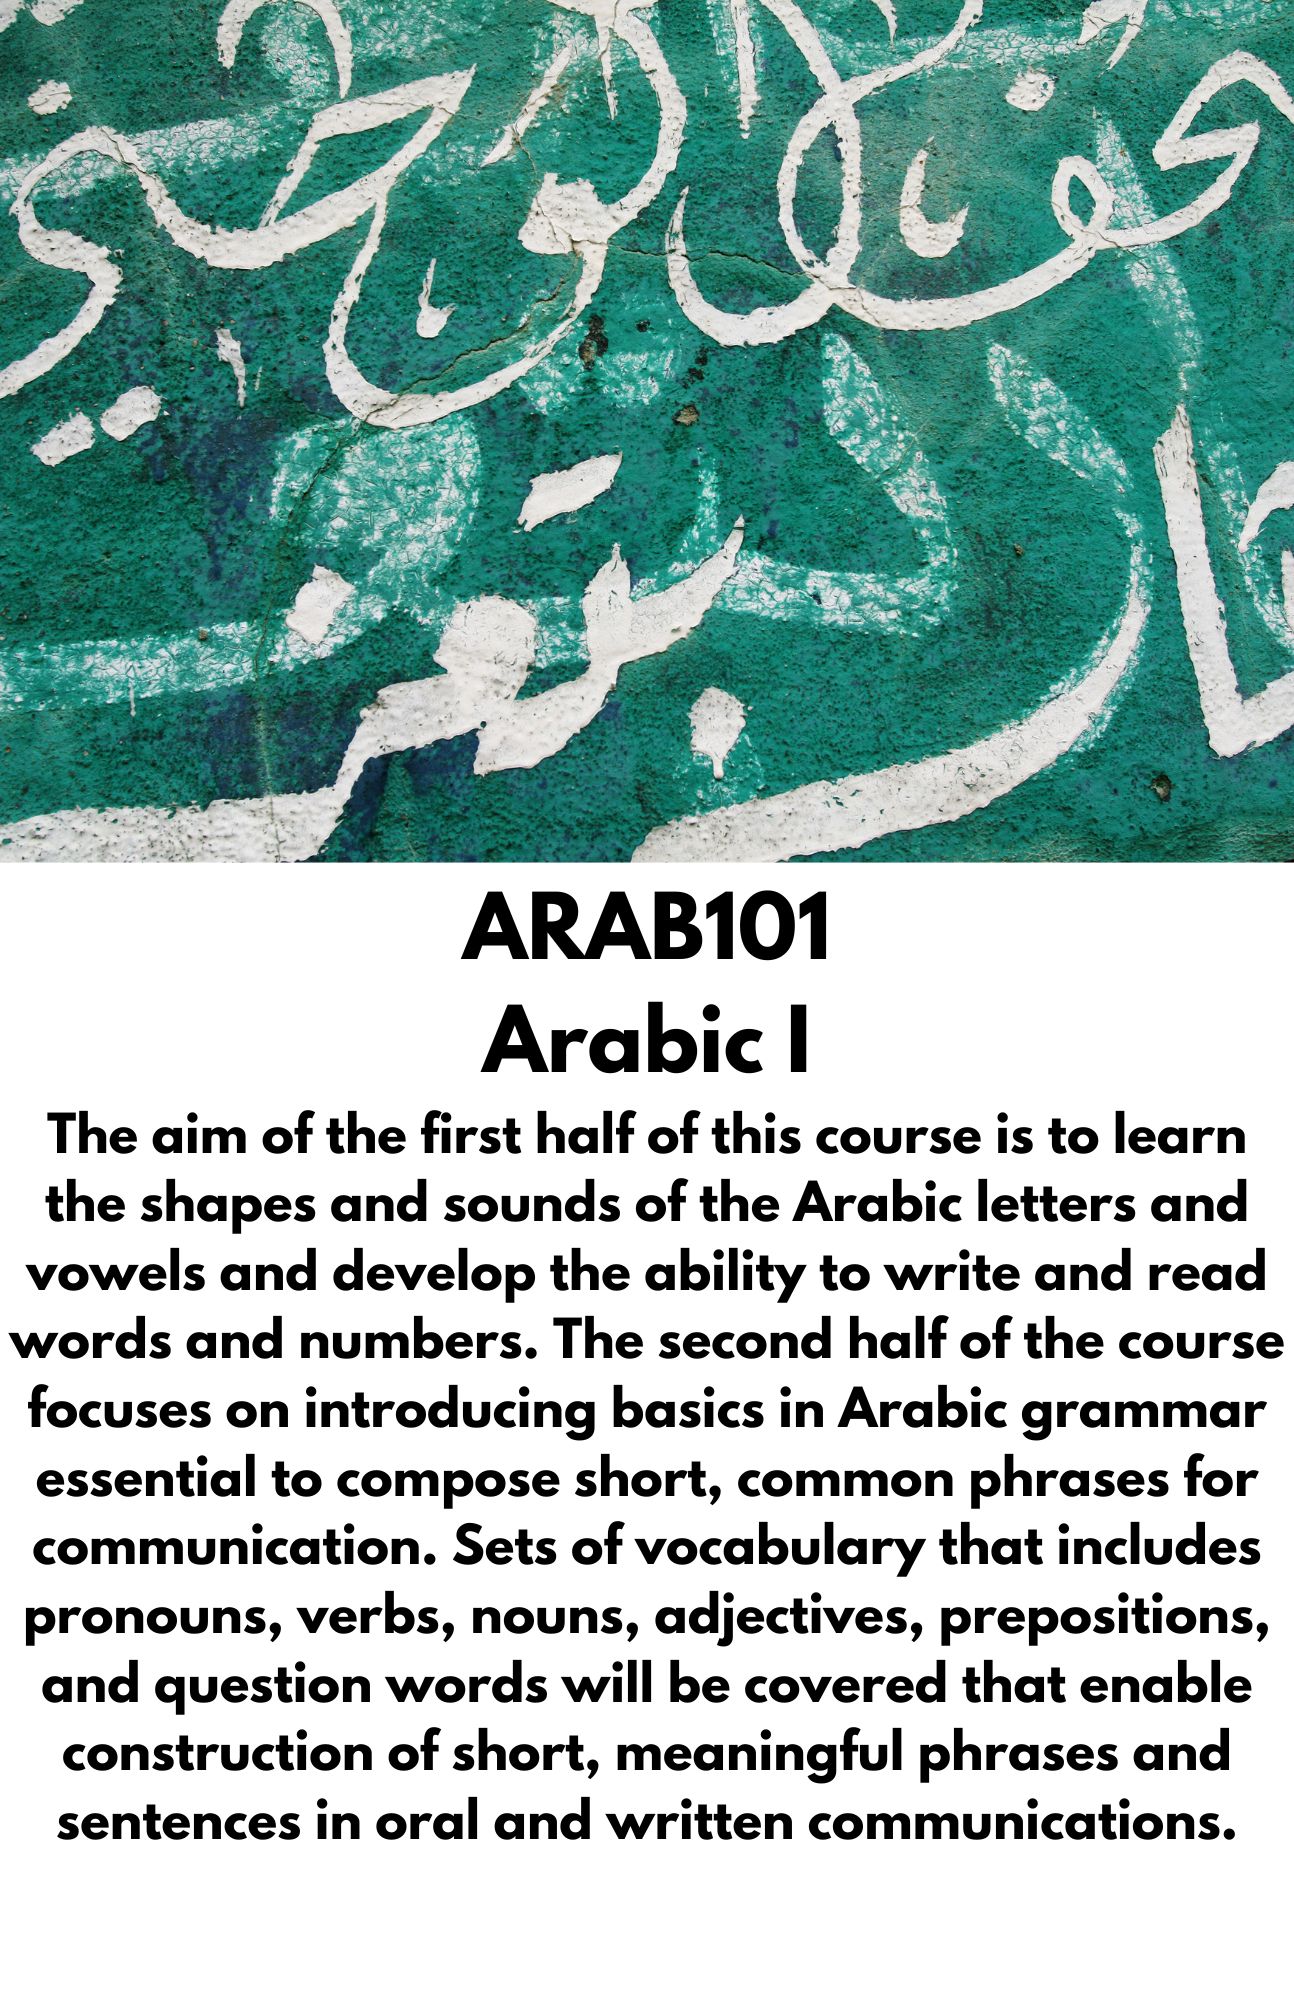 ARAB101 Arabic I The aim of the first half of this course is to learn the shapes and sounds of the Arabic letters and vowels and develop the ability to write and read words and numbers. The second half of the course focuses on introducing basics in Arabic grammar essential to compose short, common phrases for communication. Sets of vocabulary that includes pronouns, verbs, nouns, adjectives, prepositions, and question words will be covered that enable construction of short, meaningful phrases and sentences in oral and written communications.